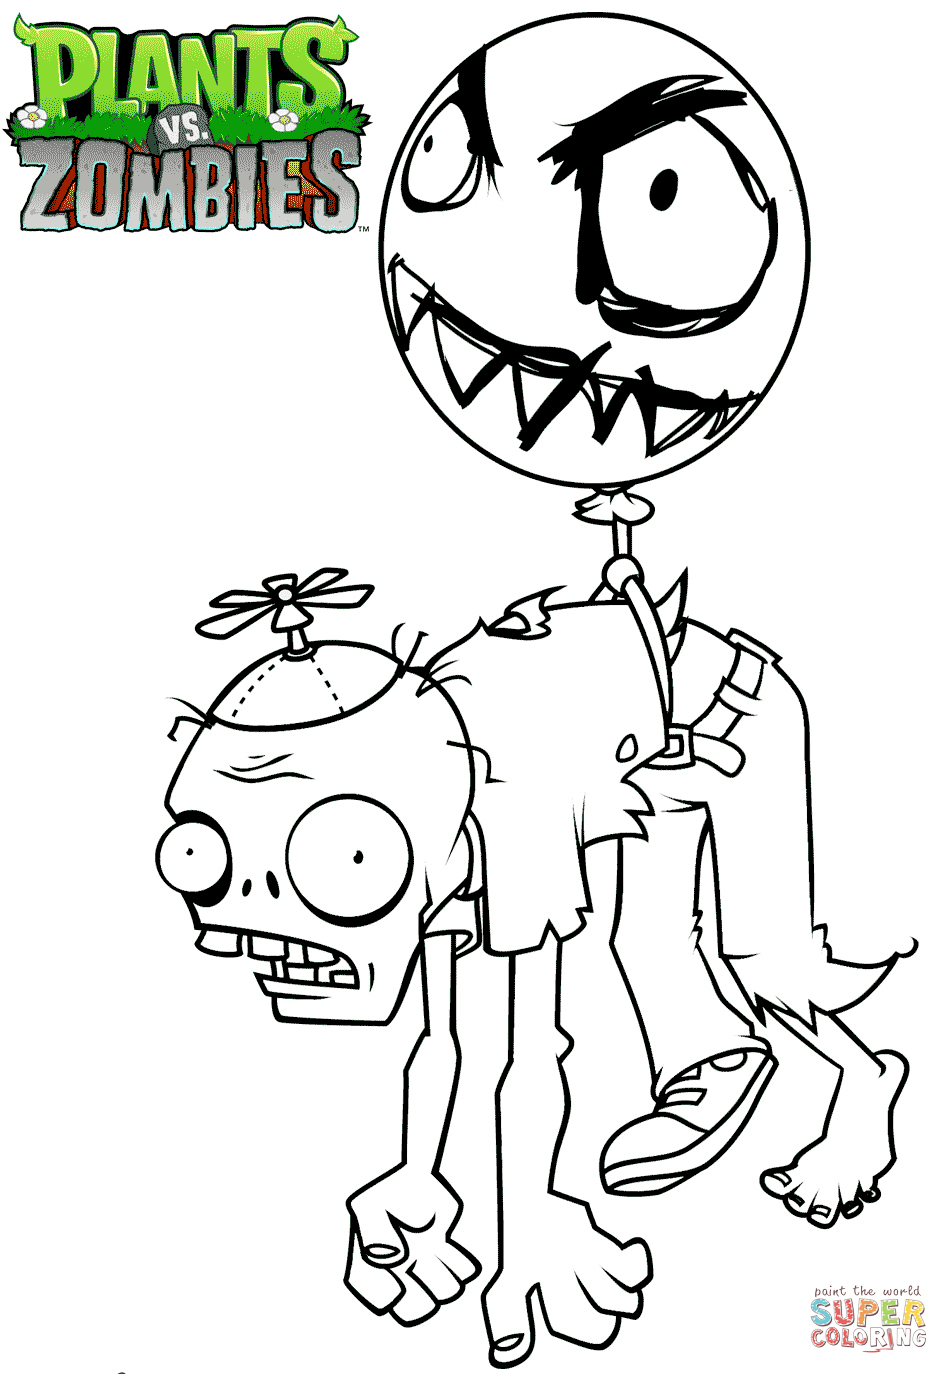 plants vs zombies drawing